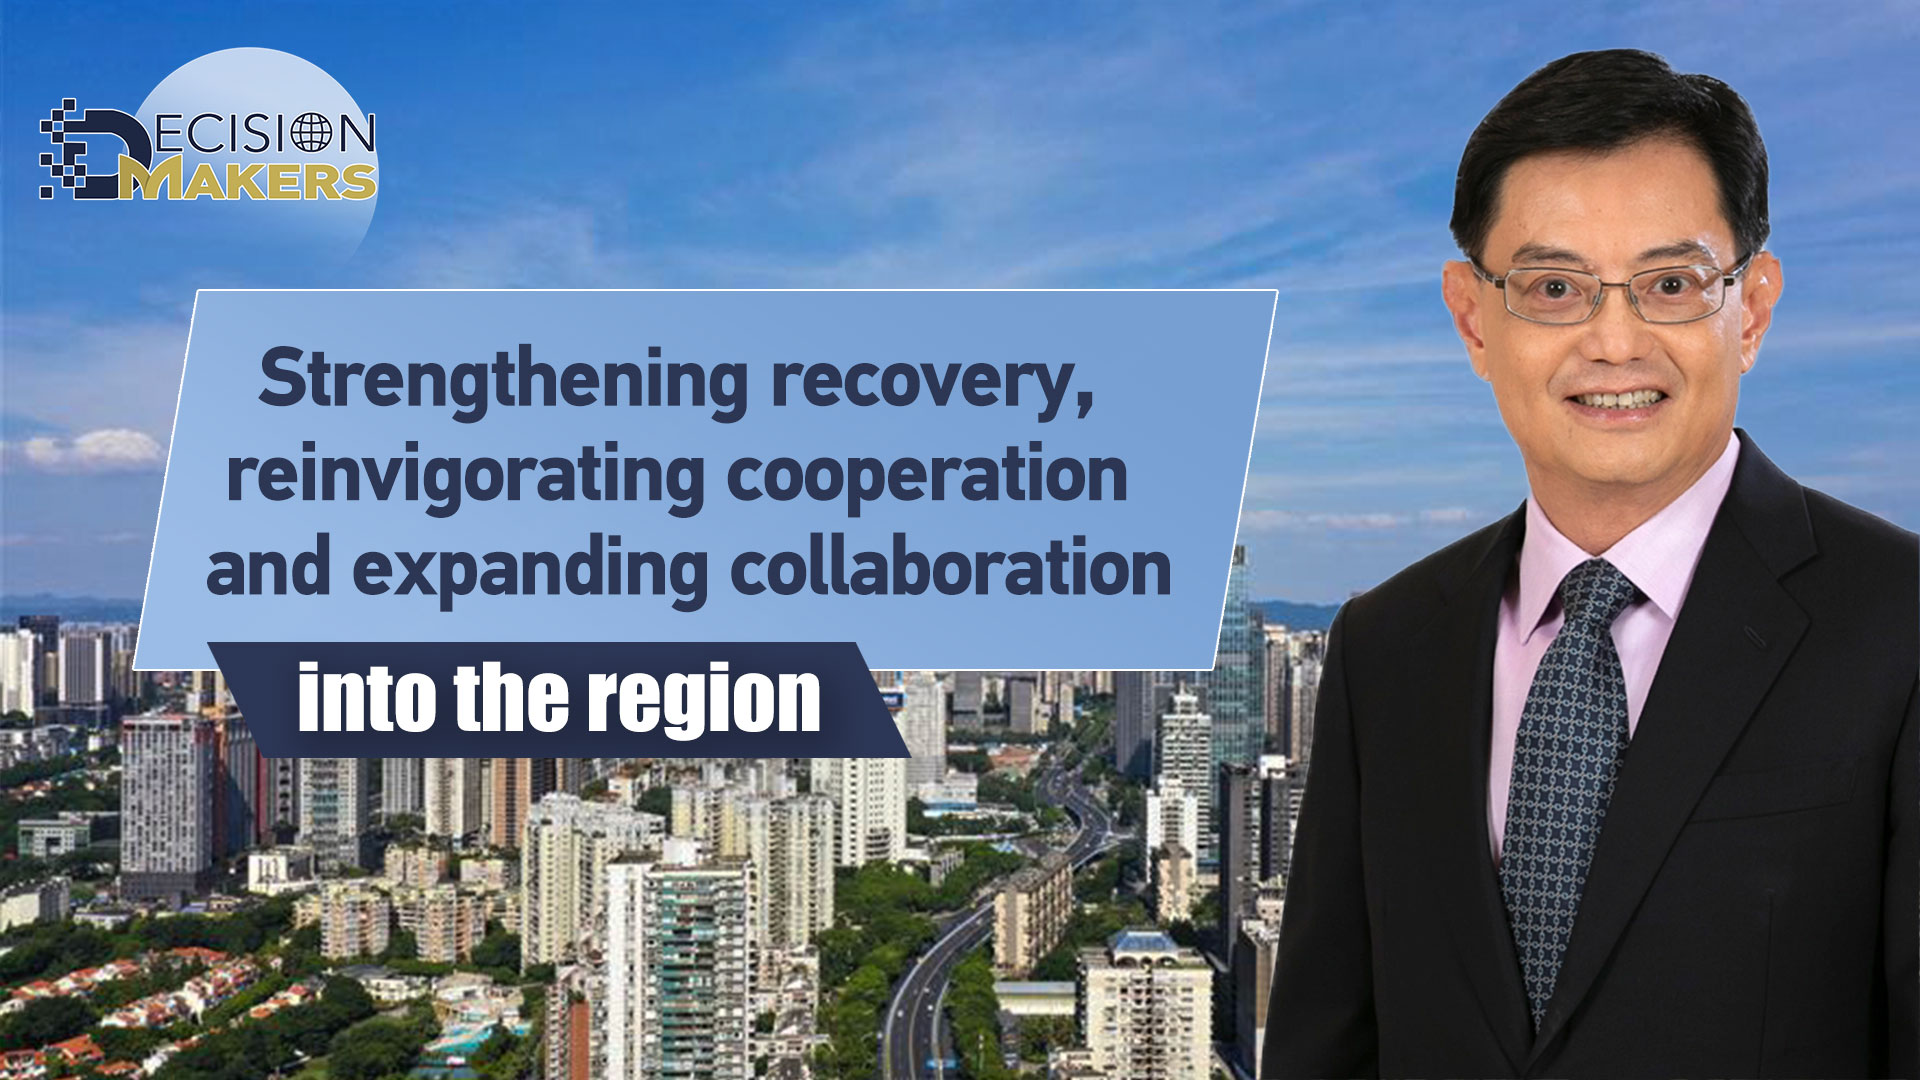 Strengthening recovery, reinvigorating cooperation and expanding collaboration into the region